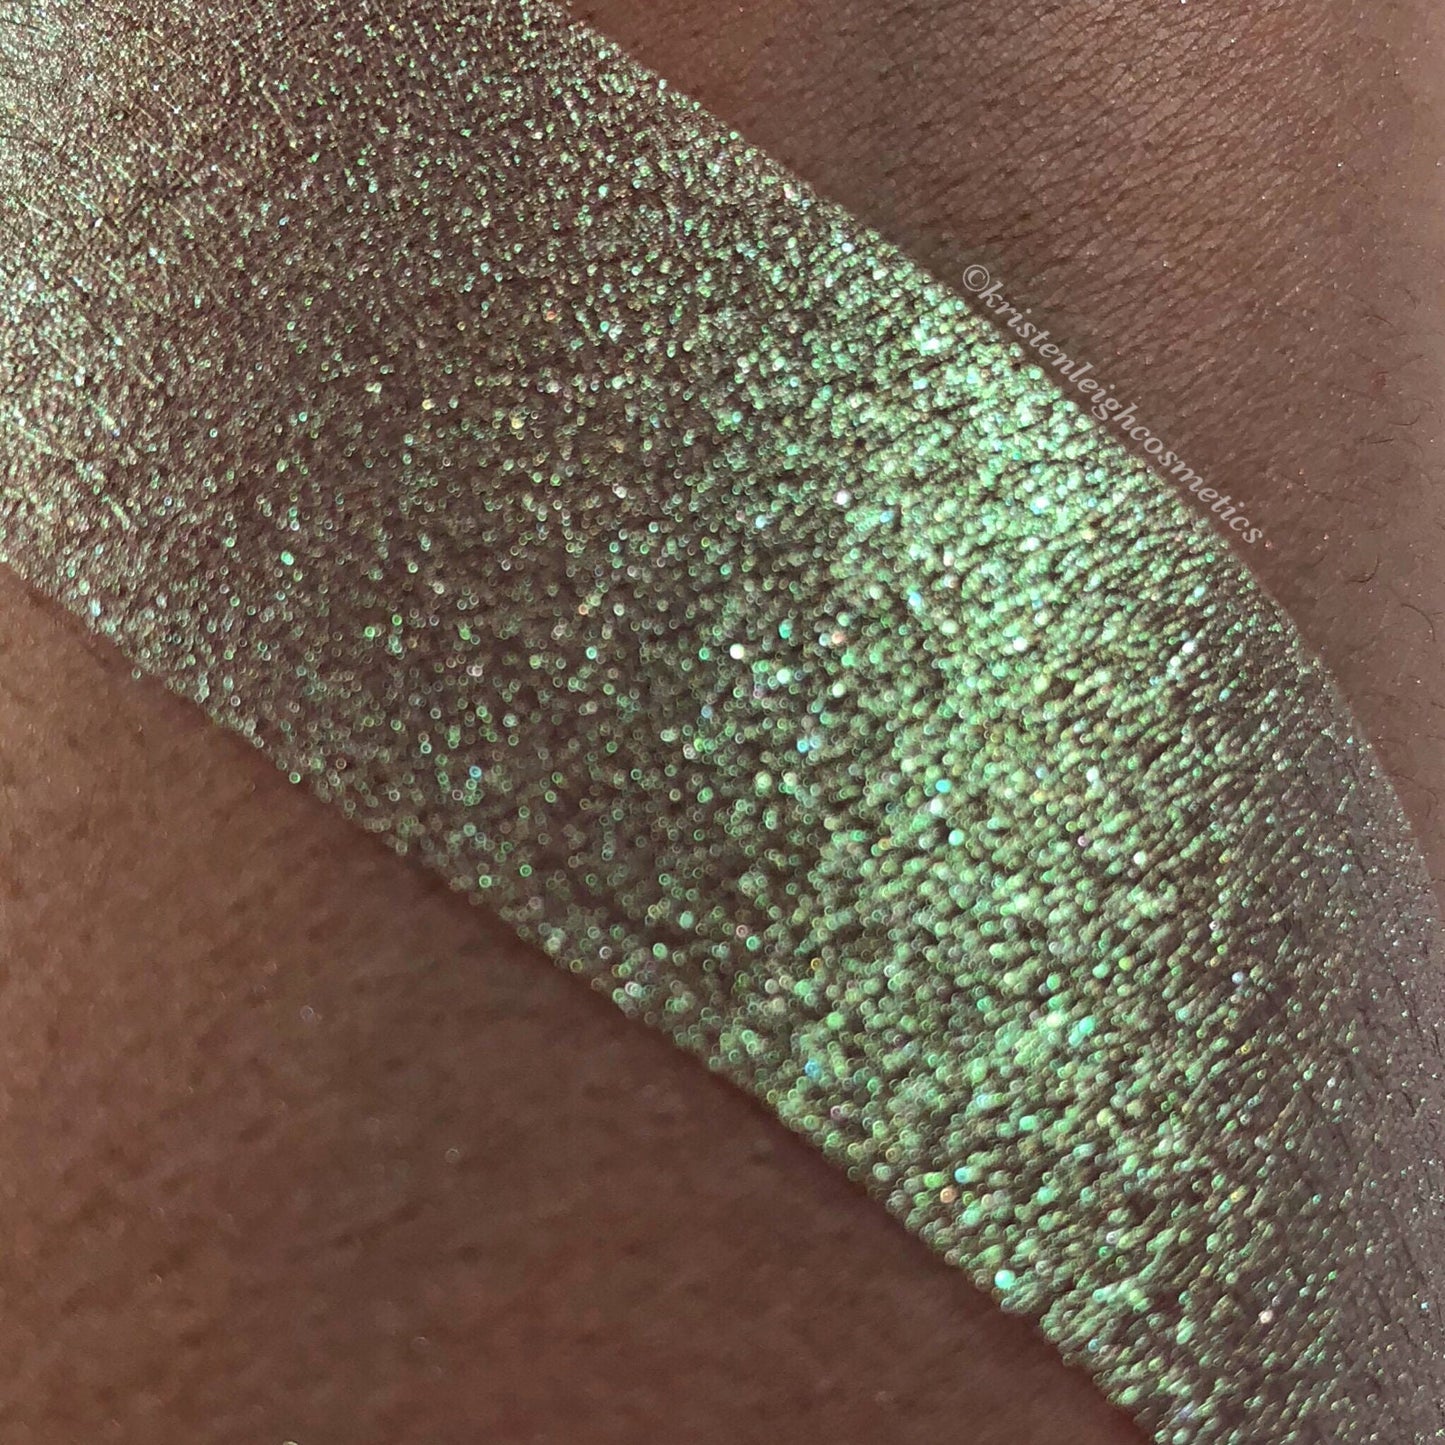 Pressed - Spectacular Sparkle Dust (Irridescent, Duochrome) Highlighter Collection